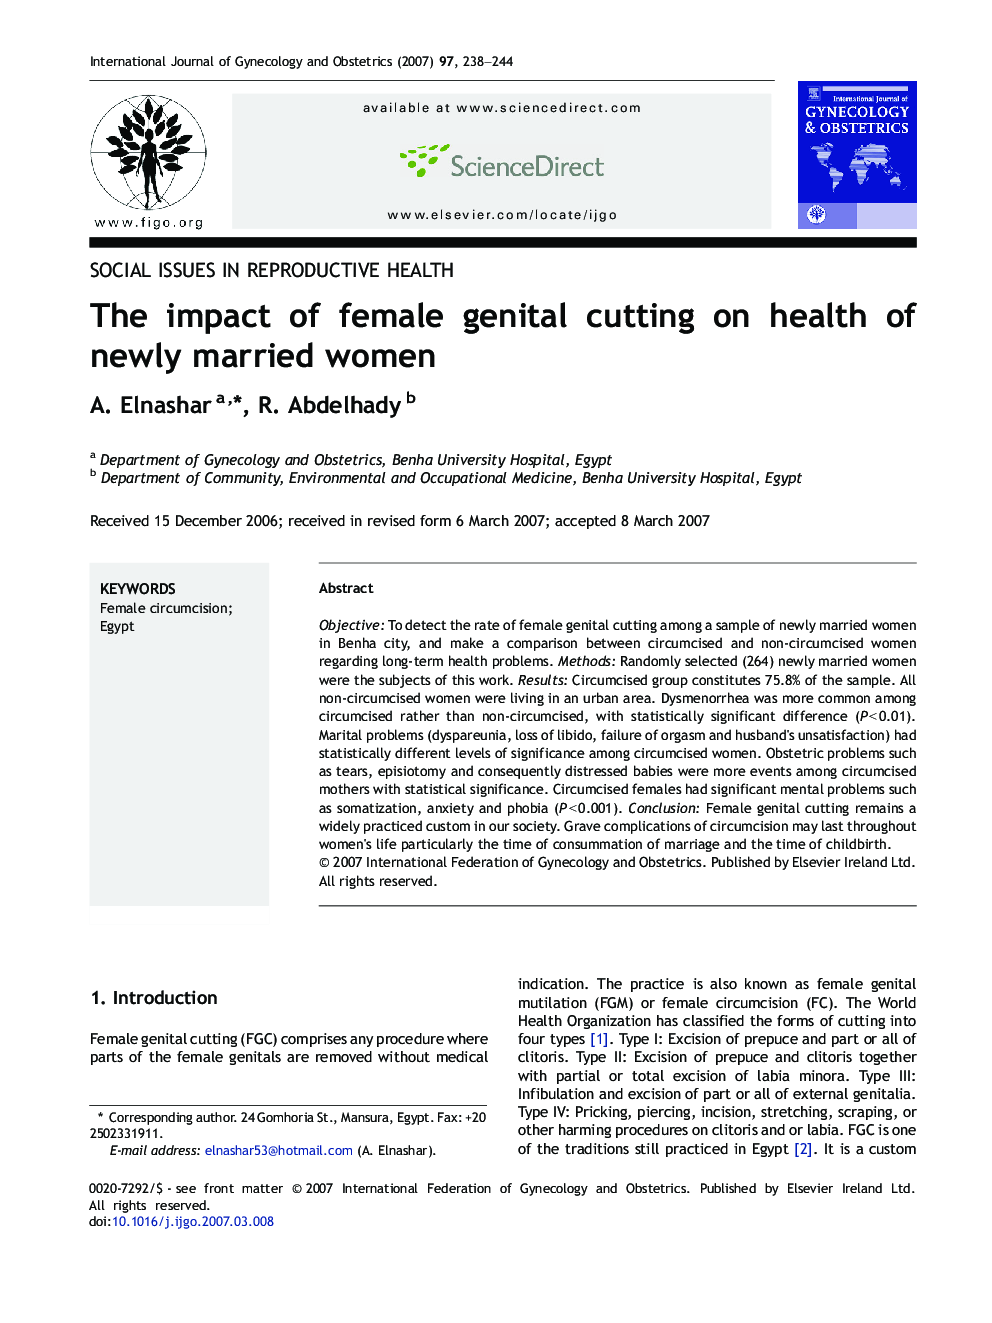 The impact of female genital cutting on health of newly married women